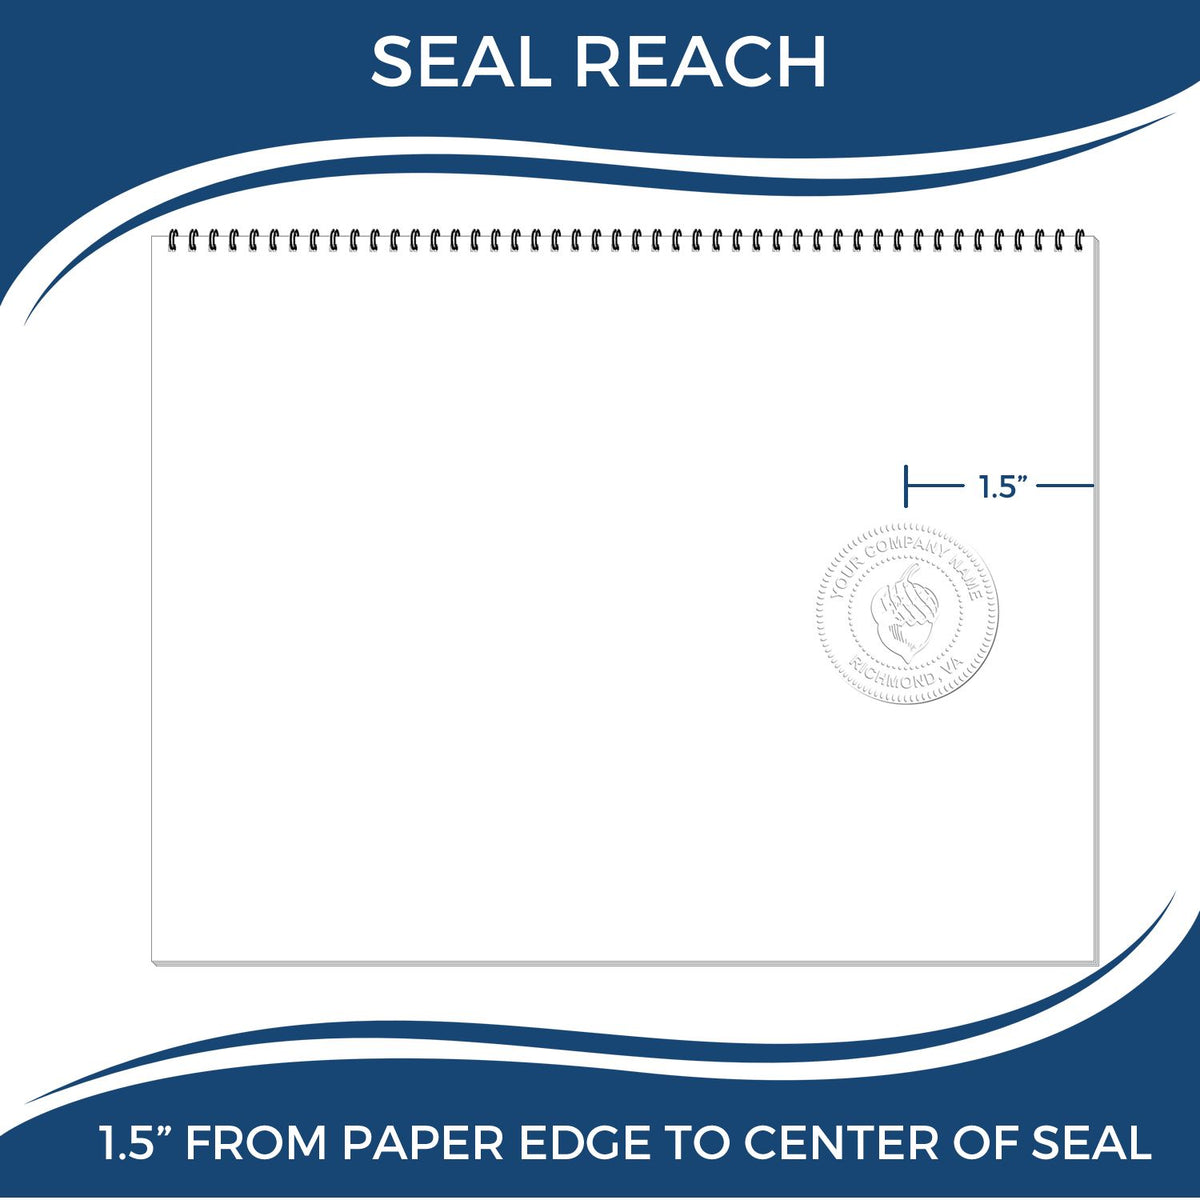 An infographic showing the seal reach which is represented by a ruler and a miniature seal image of the Handheld Guam Architect Seal Embosser